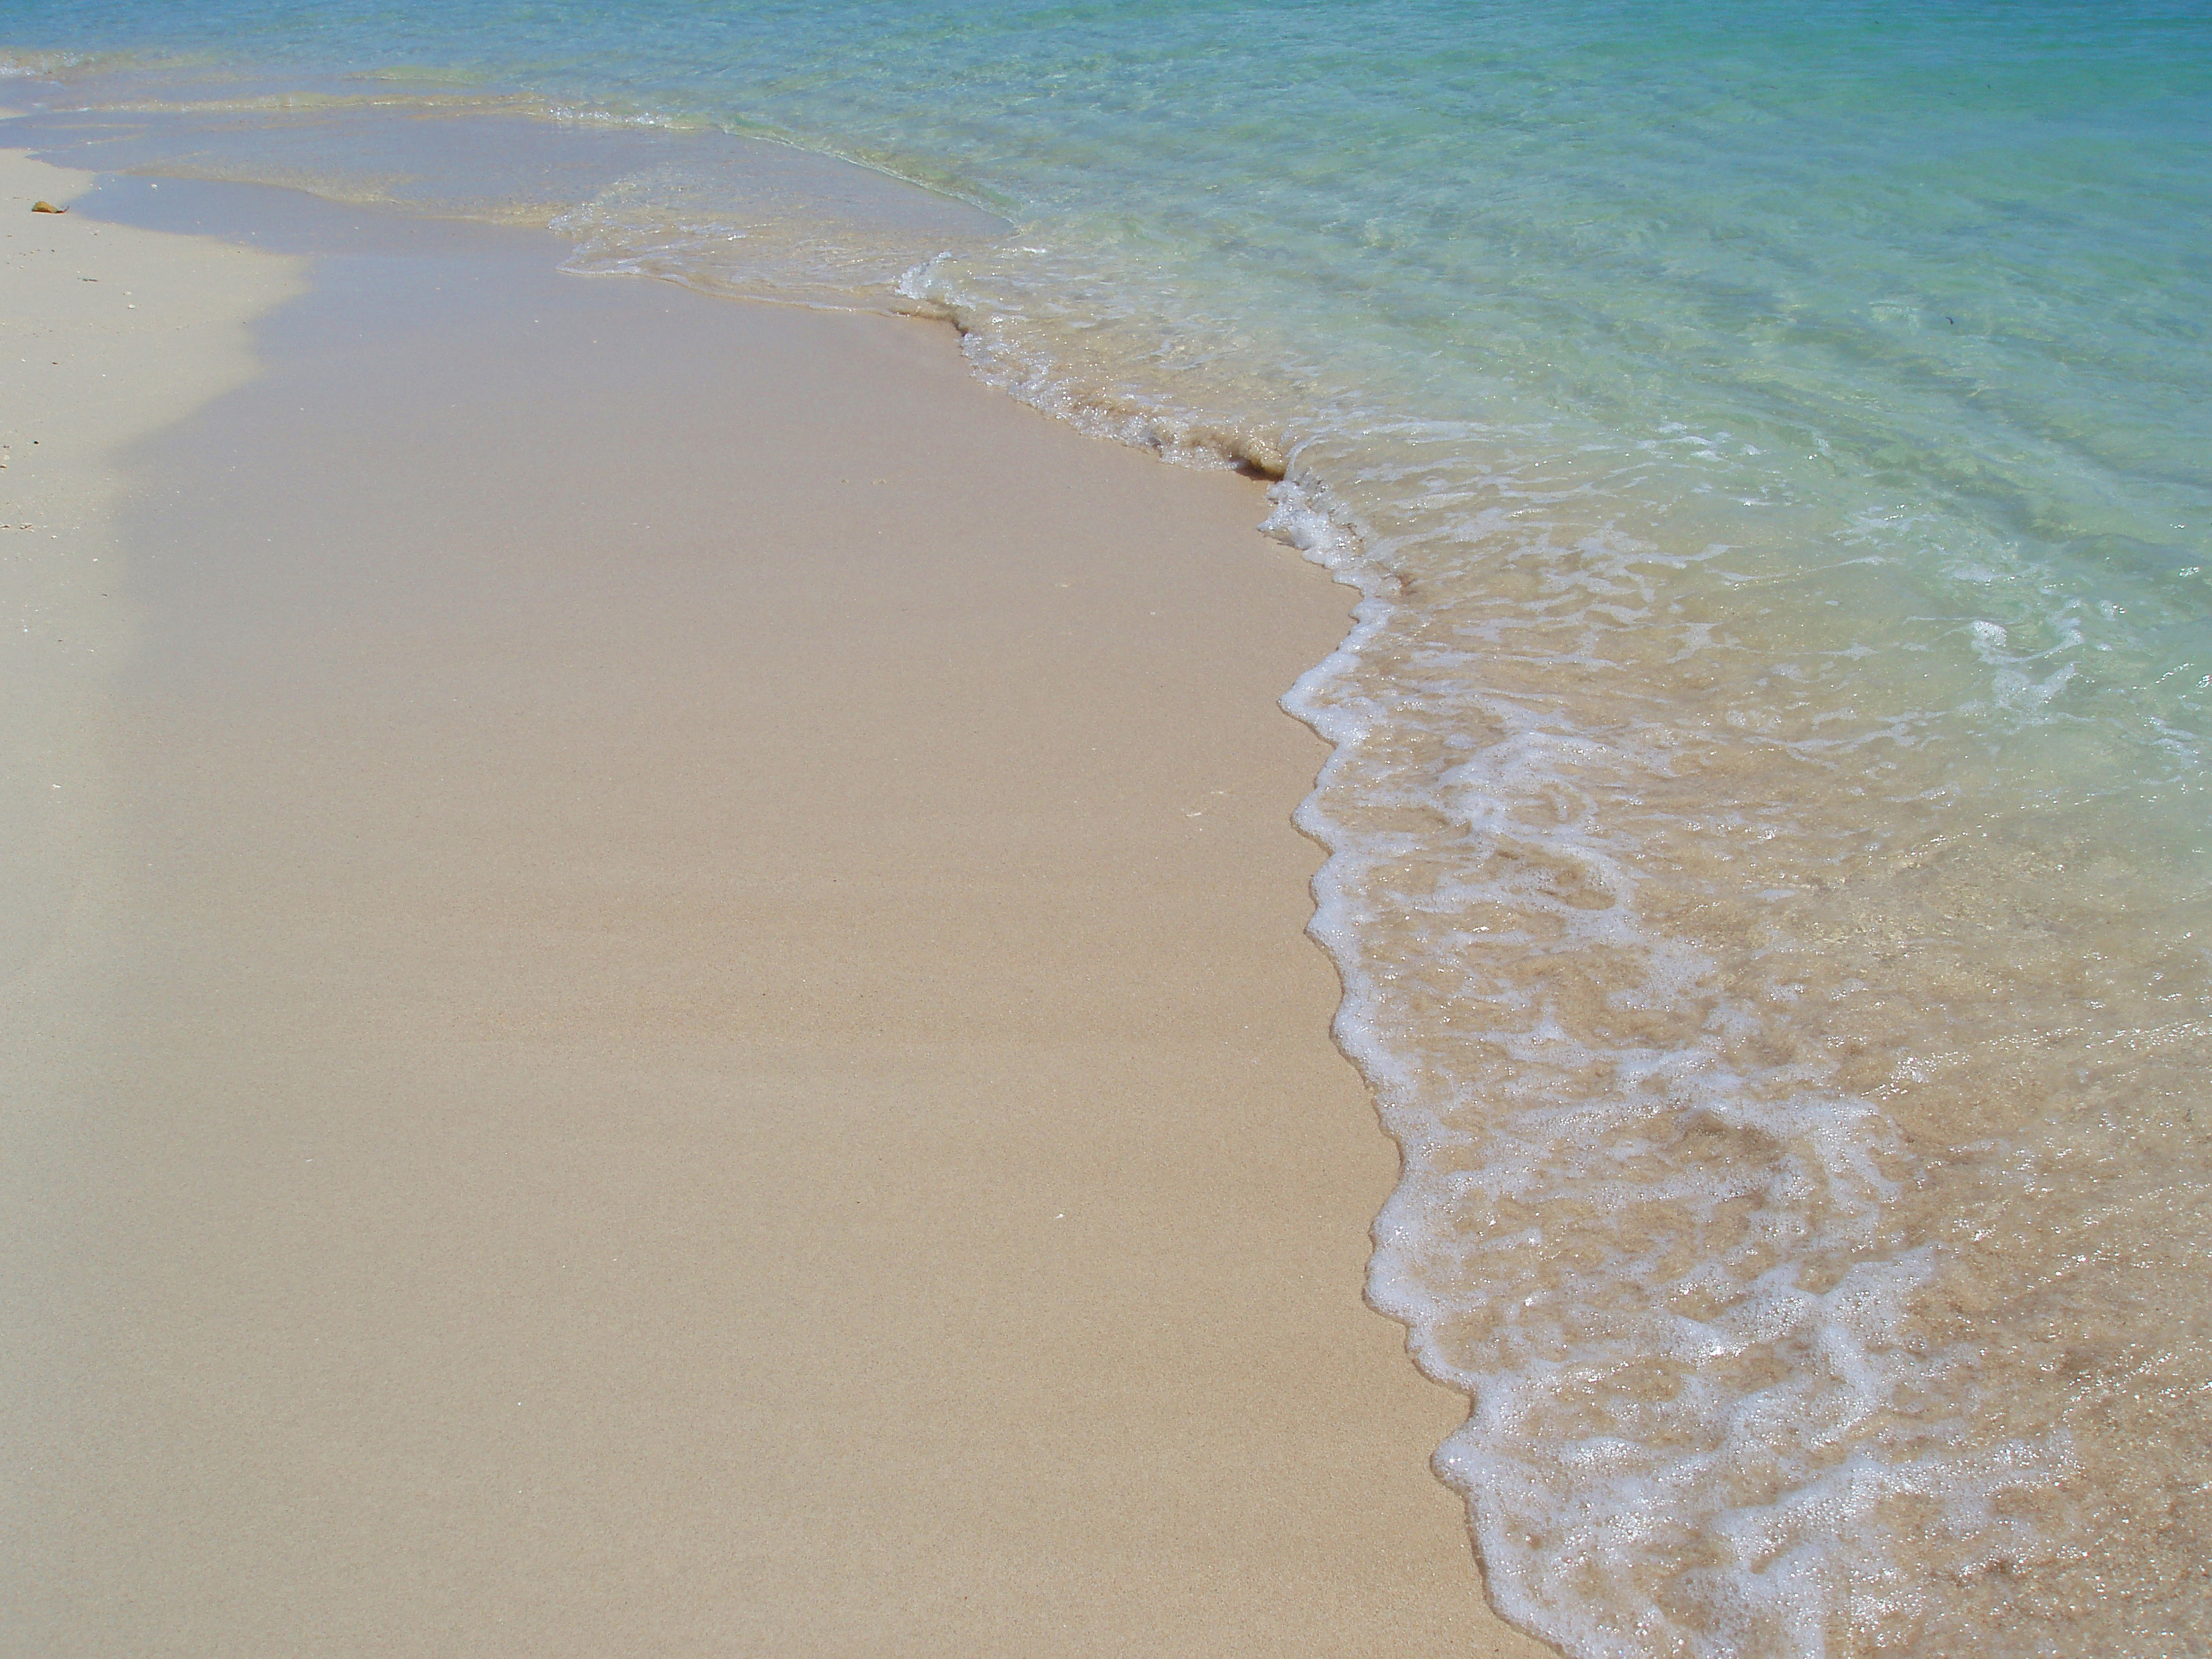 Shoreline with Clear Sea Water and White Sand-8836 | Stockarch Free